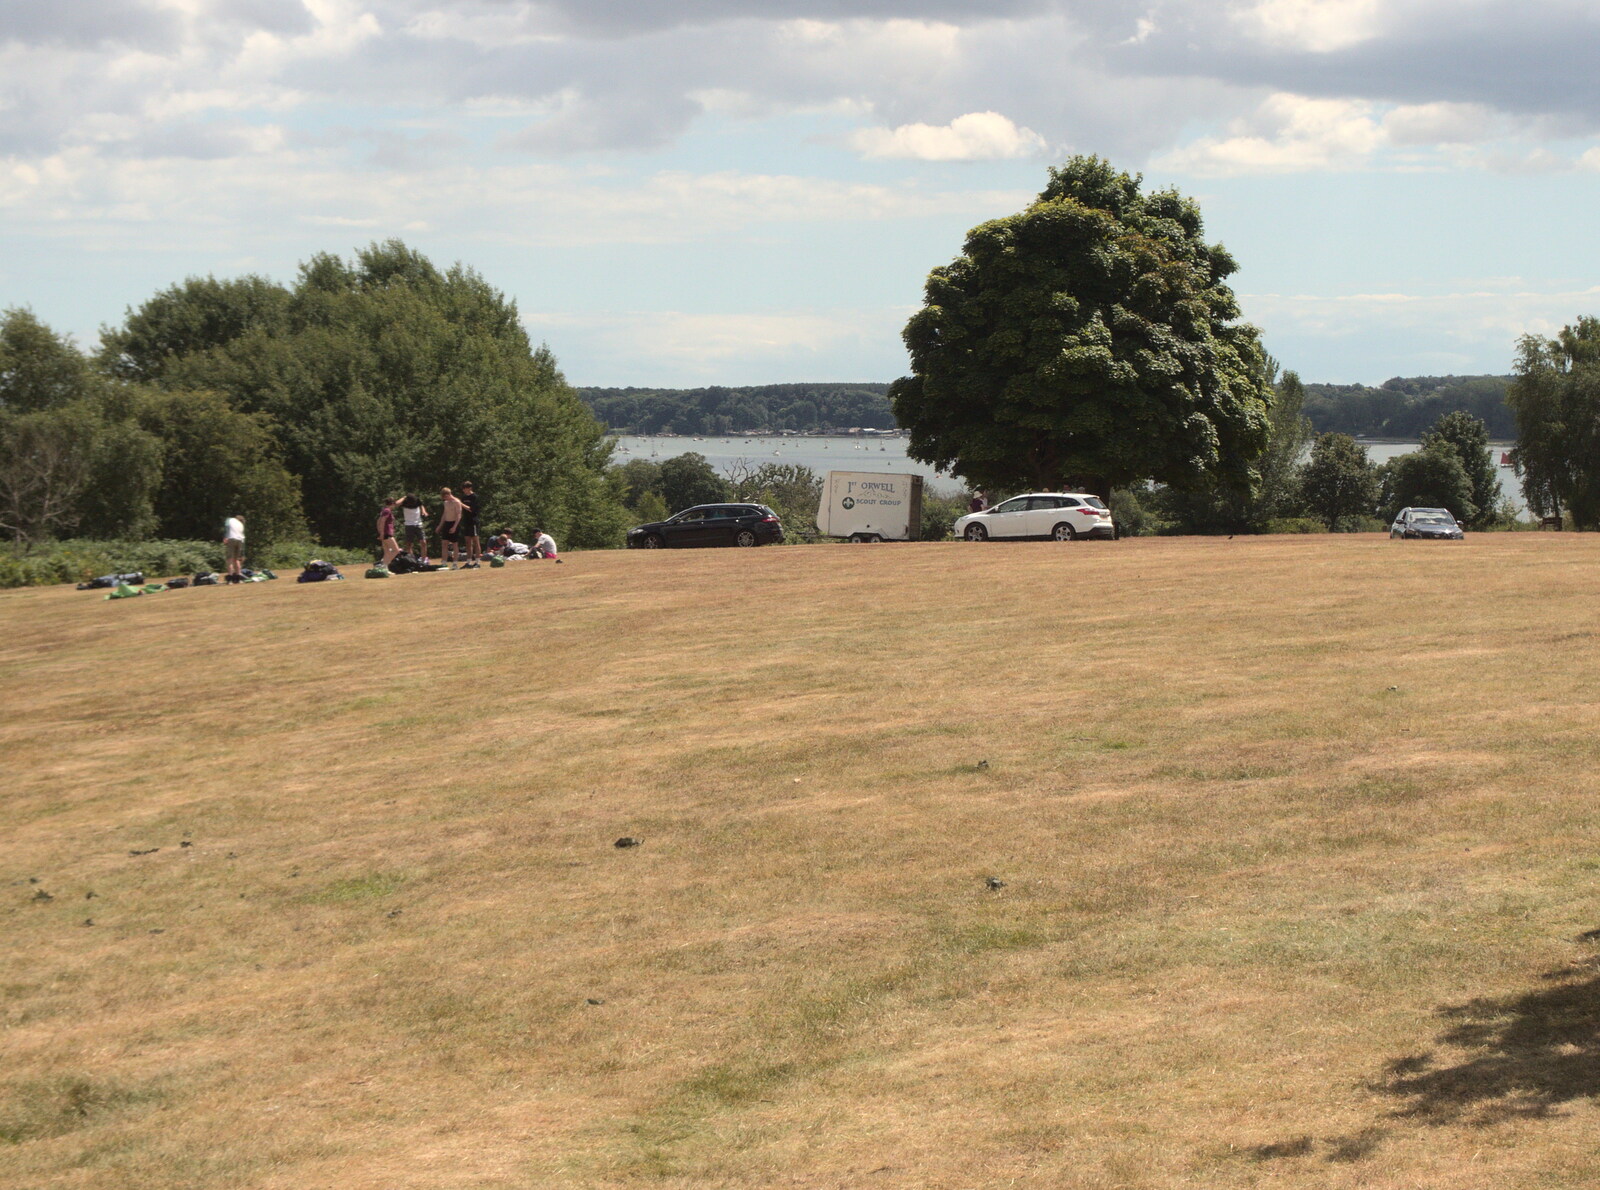 There's a nice view over the parched grass from A Fire, a Fête, and a Scout Camp, Hallowtree, Suffolk - 30th June 2022